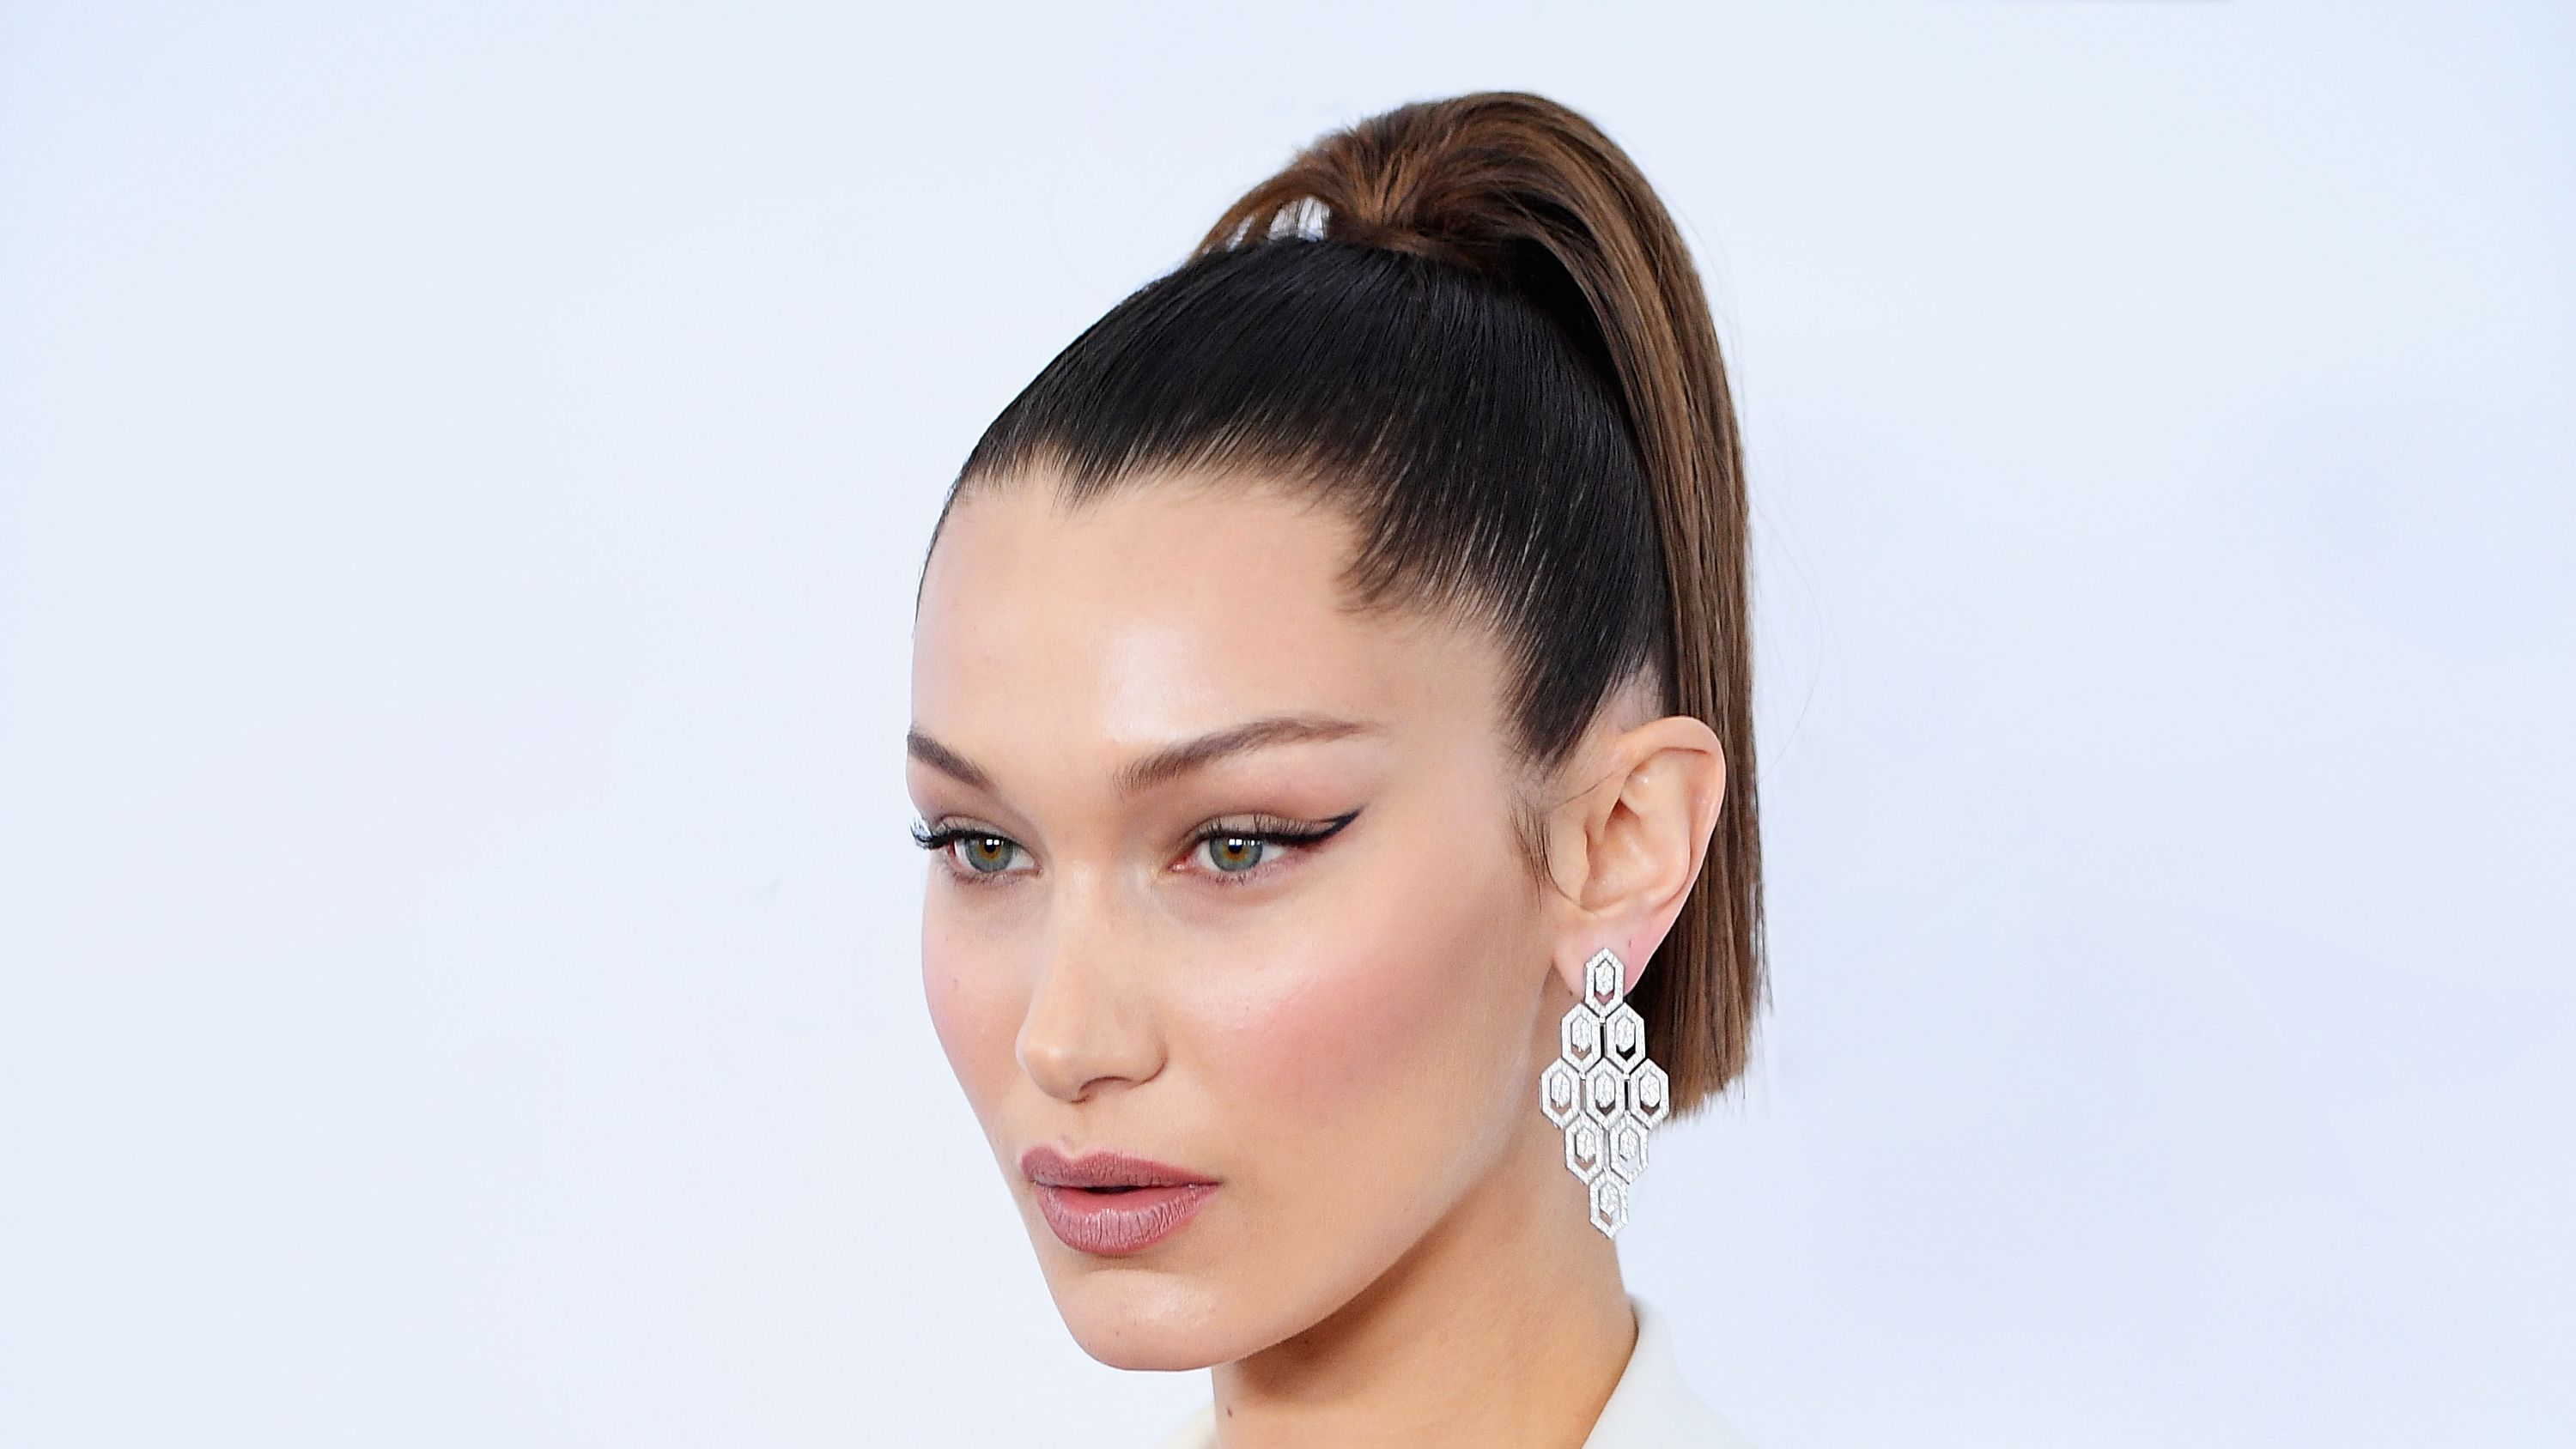 Bella Hadid Dyed Her Hair a Dirty Blonde Shade You've Never Seen Before |  Marie Claire